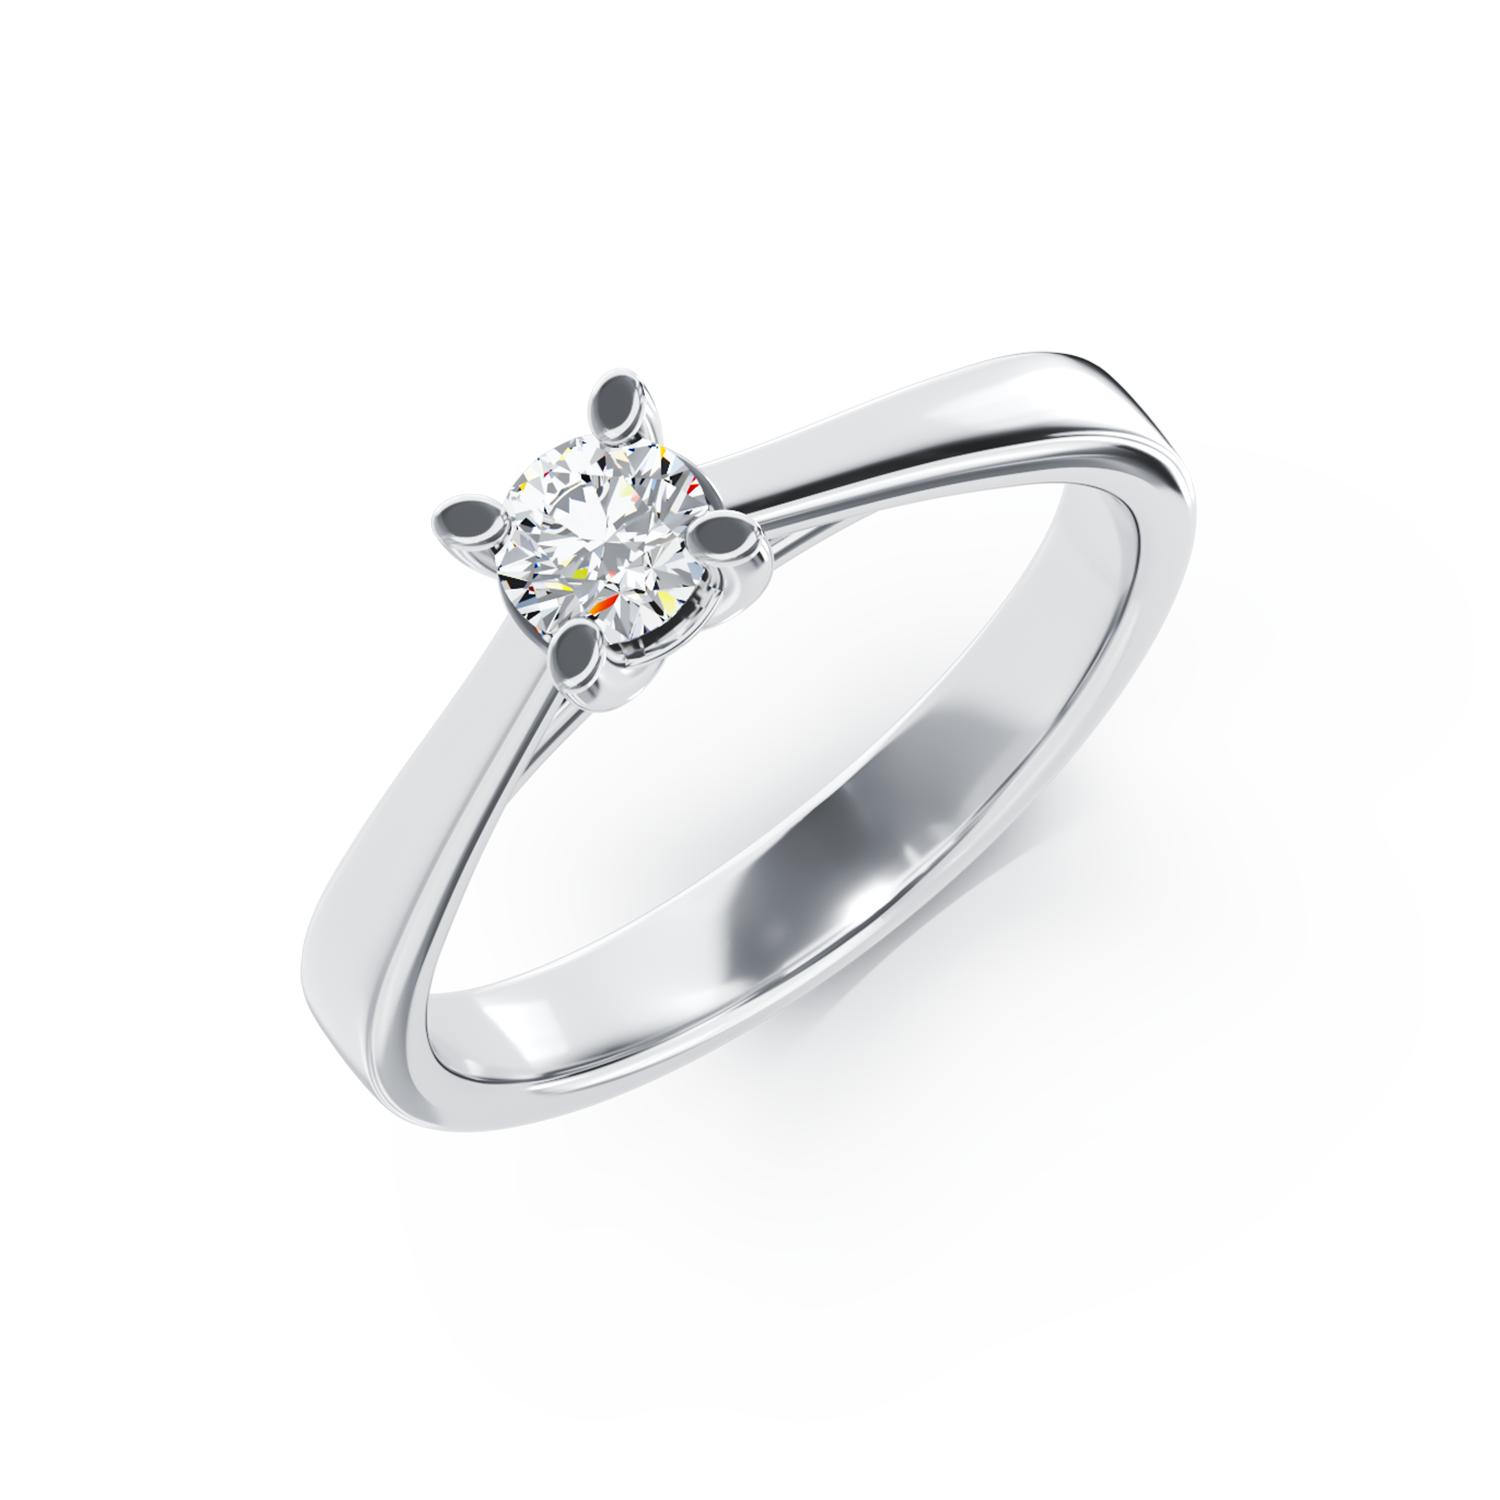 White gold engagement ring with a 0.15ct solitaire diamond